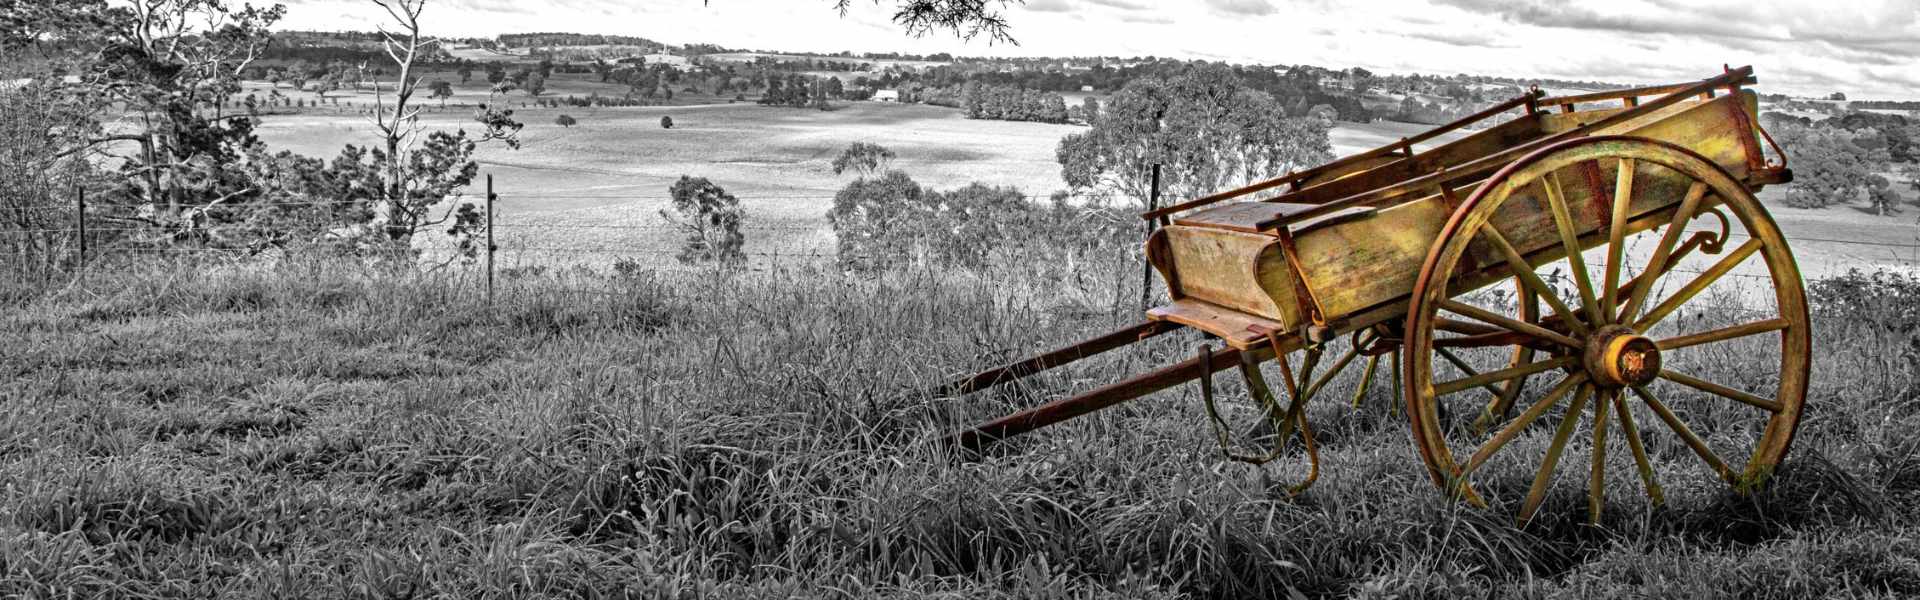 No Time to Spare, Southern Highlands exhibition Wingecarribee Photo by Richard Batterley copyright 2022.jpg